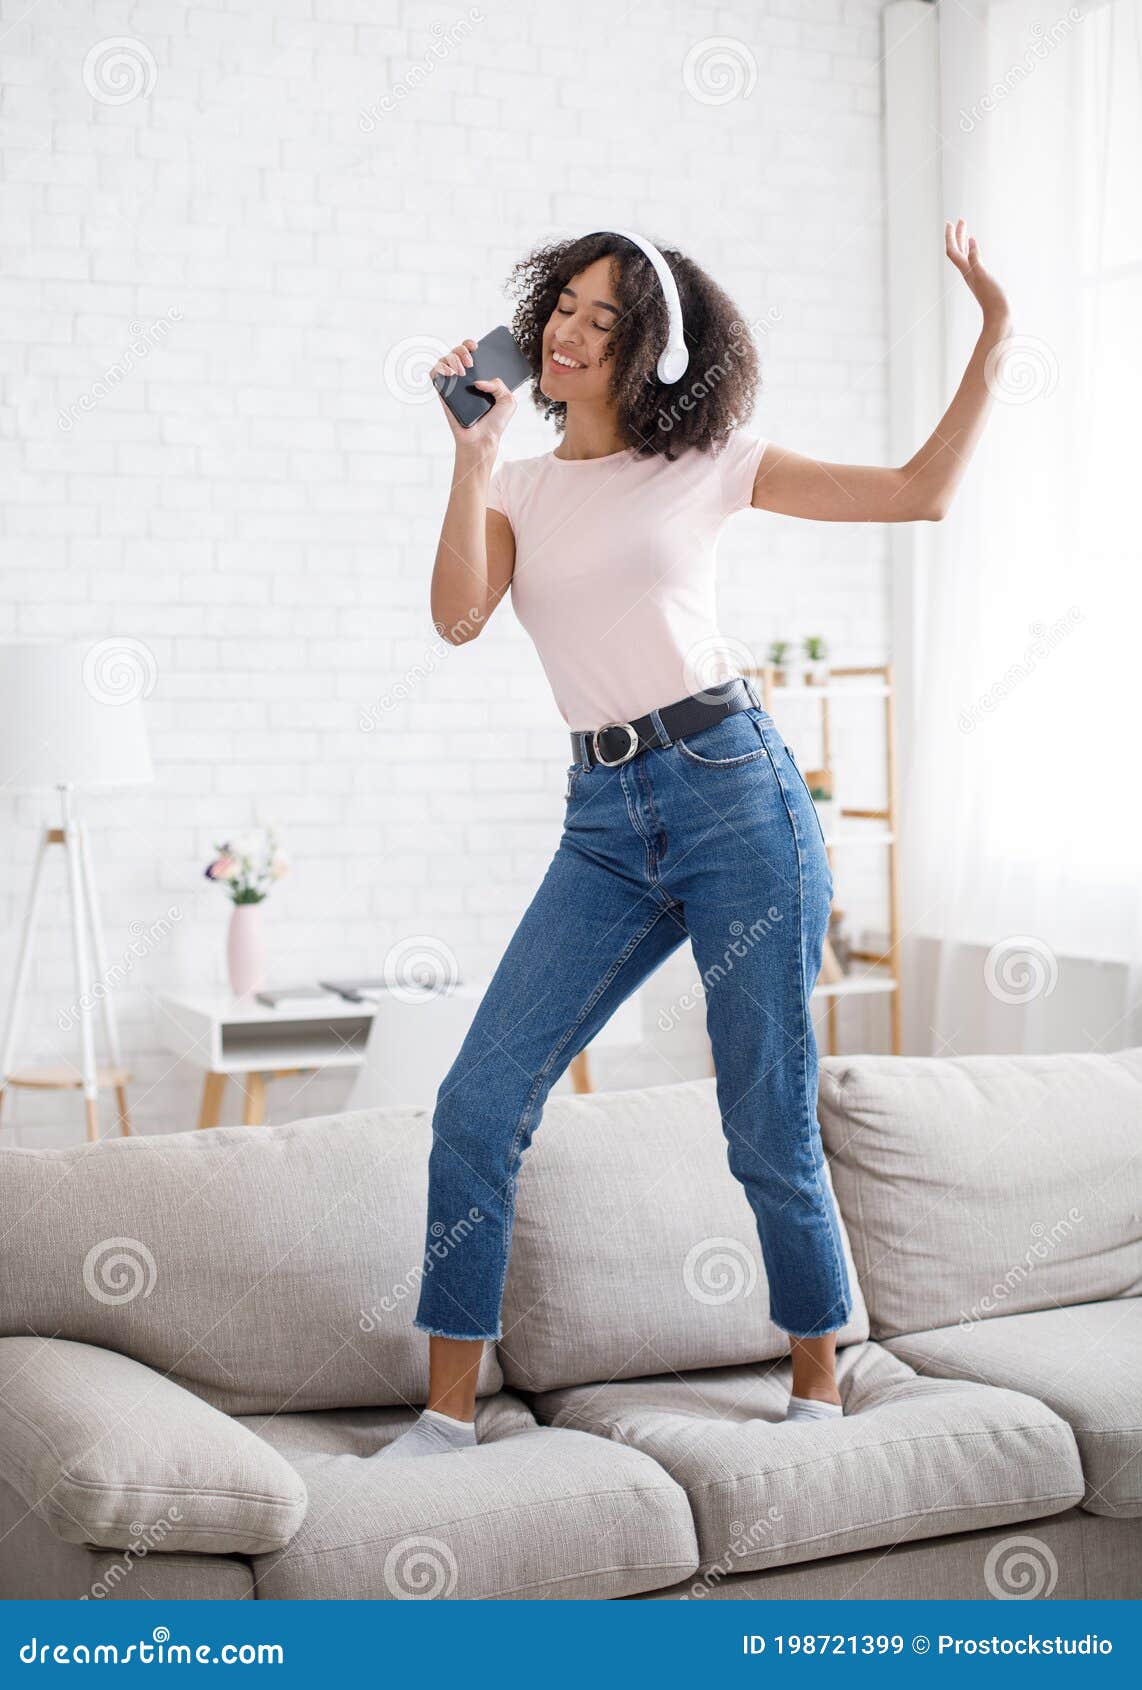 Musical Mobile App and Imaginary Microphone. Funny African American Woman  Dancing on Sofa Stock Image - Image of musical, microphone: 198721399